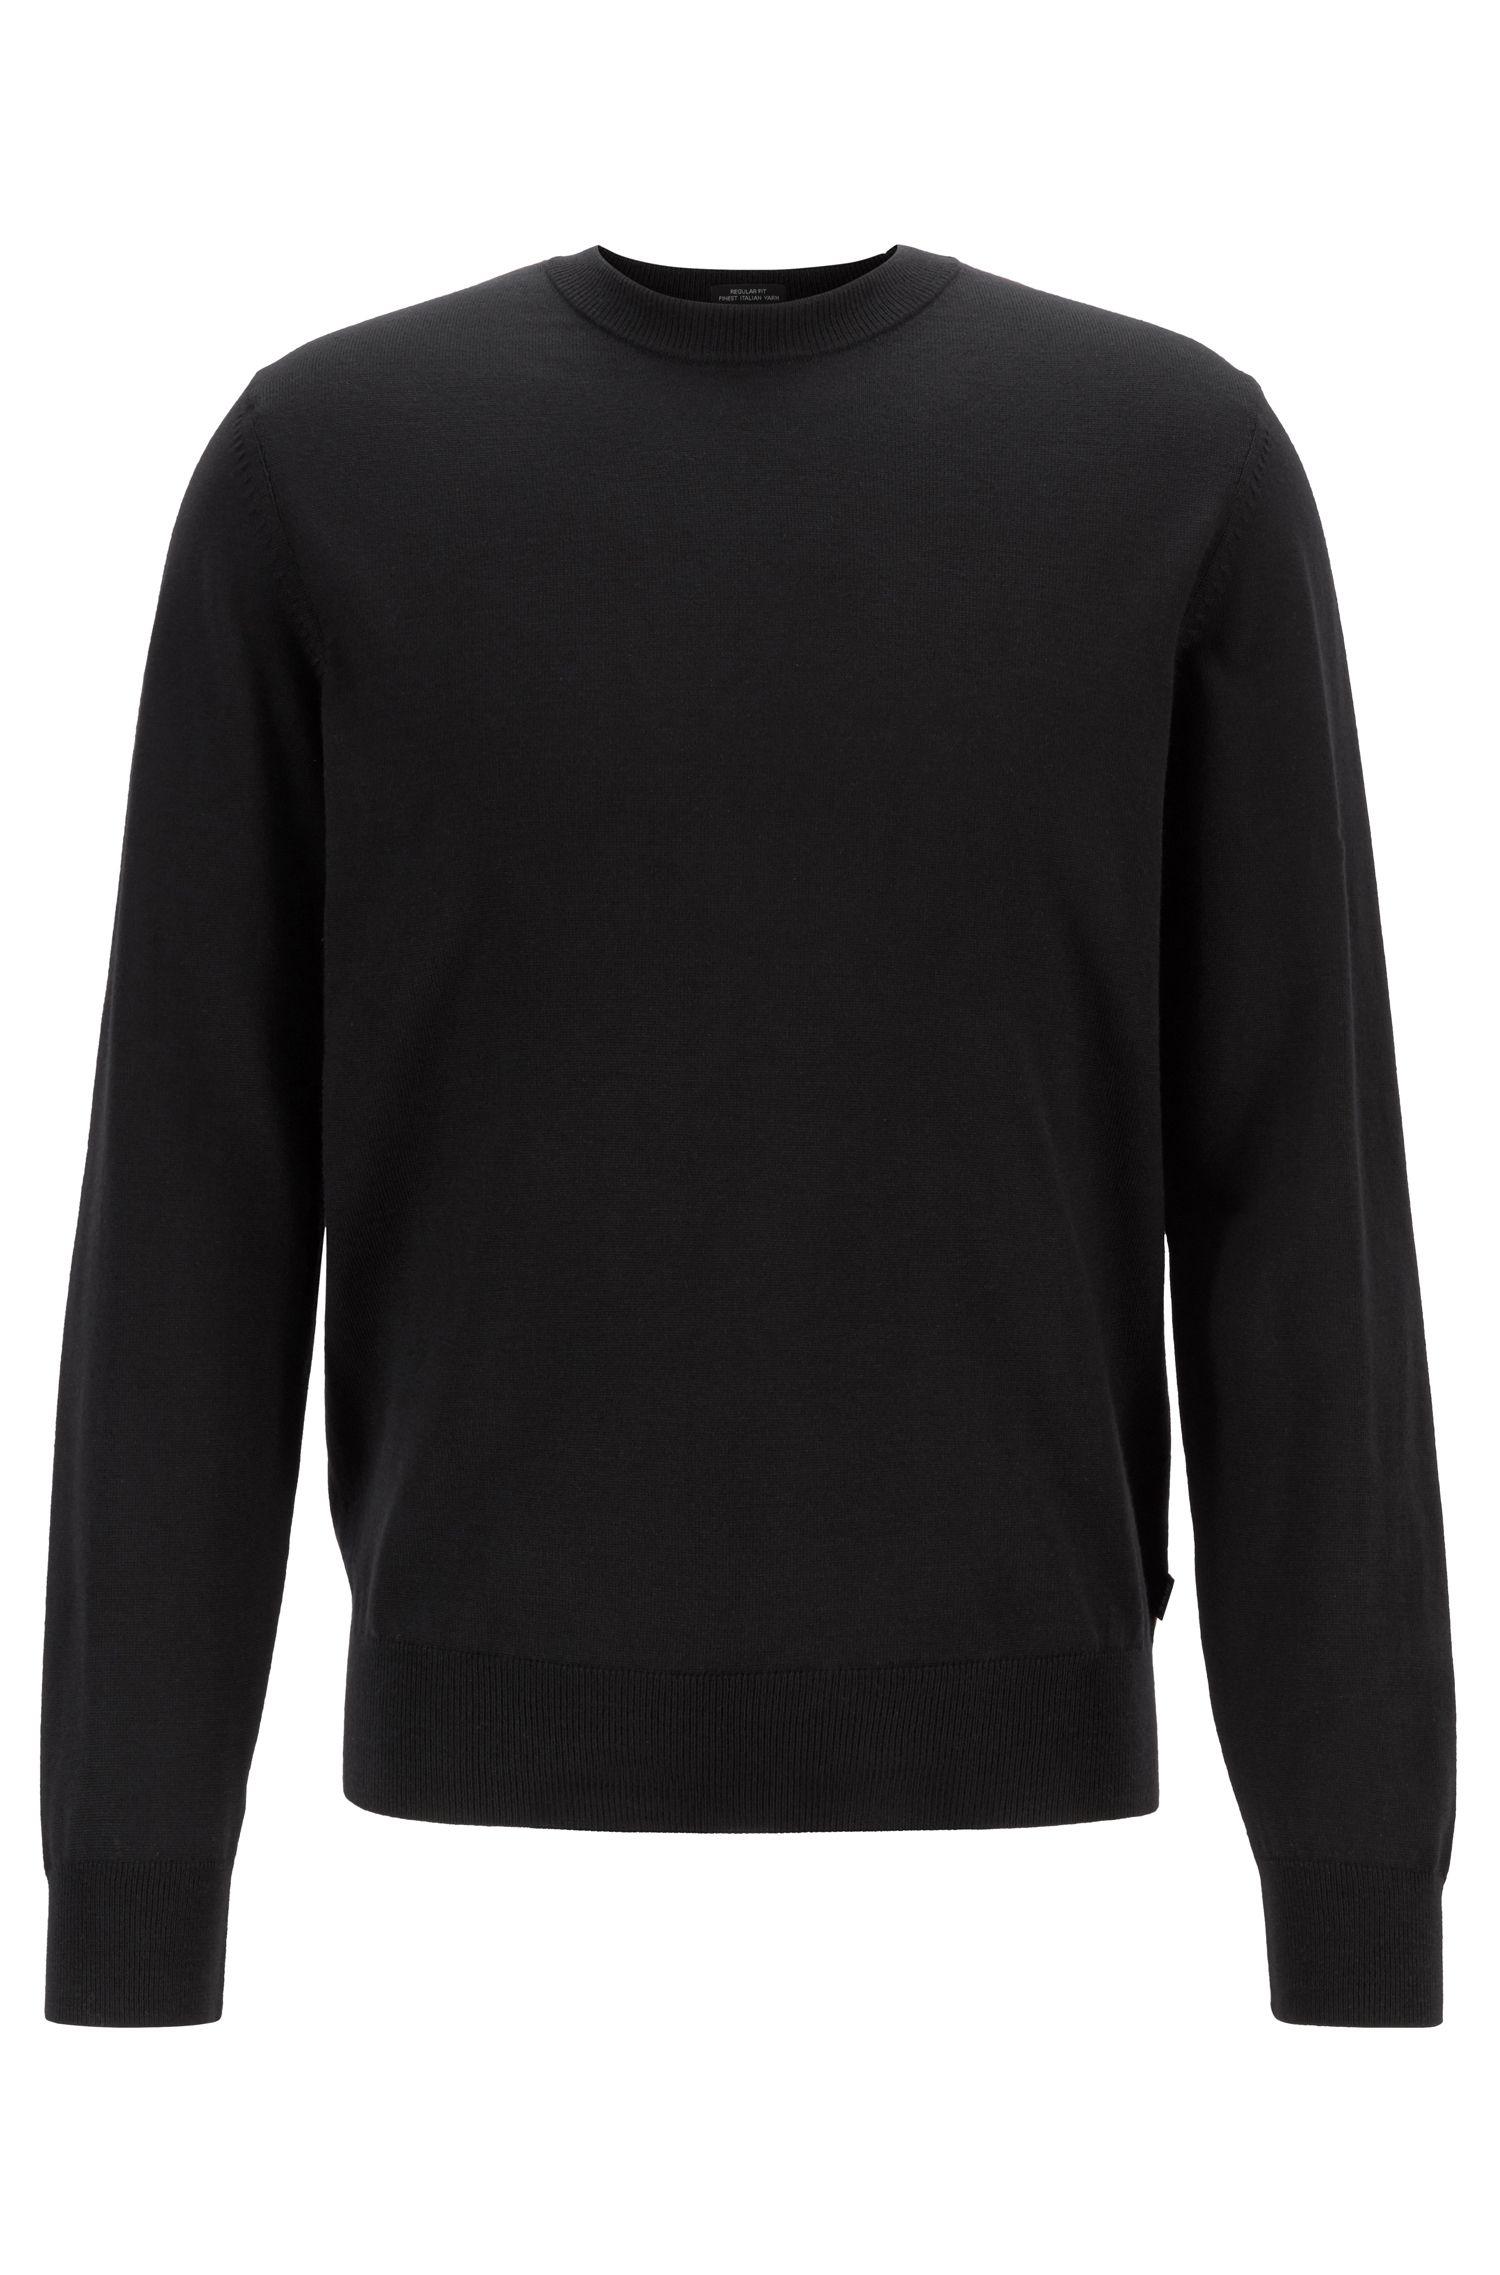 BOSS Virgin-wool Sweater With Color-block Framing in Black for Men - Lyst